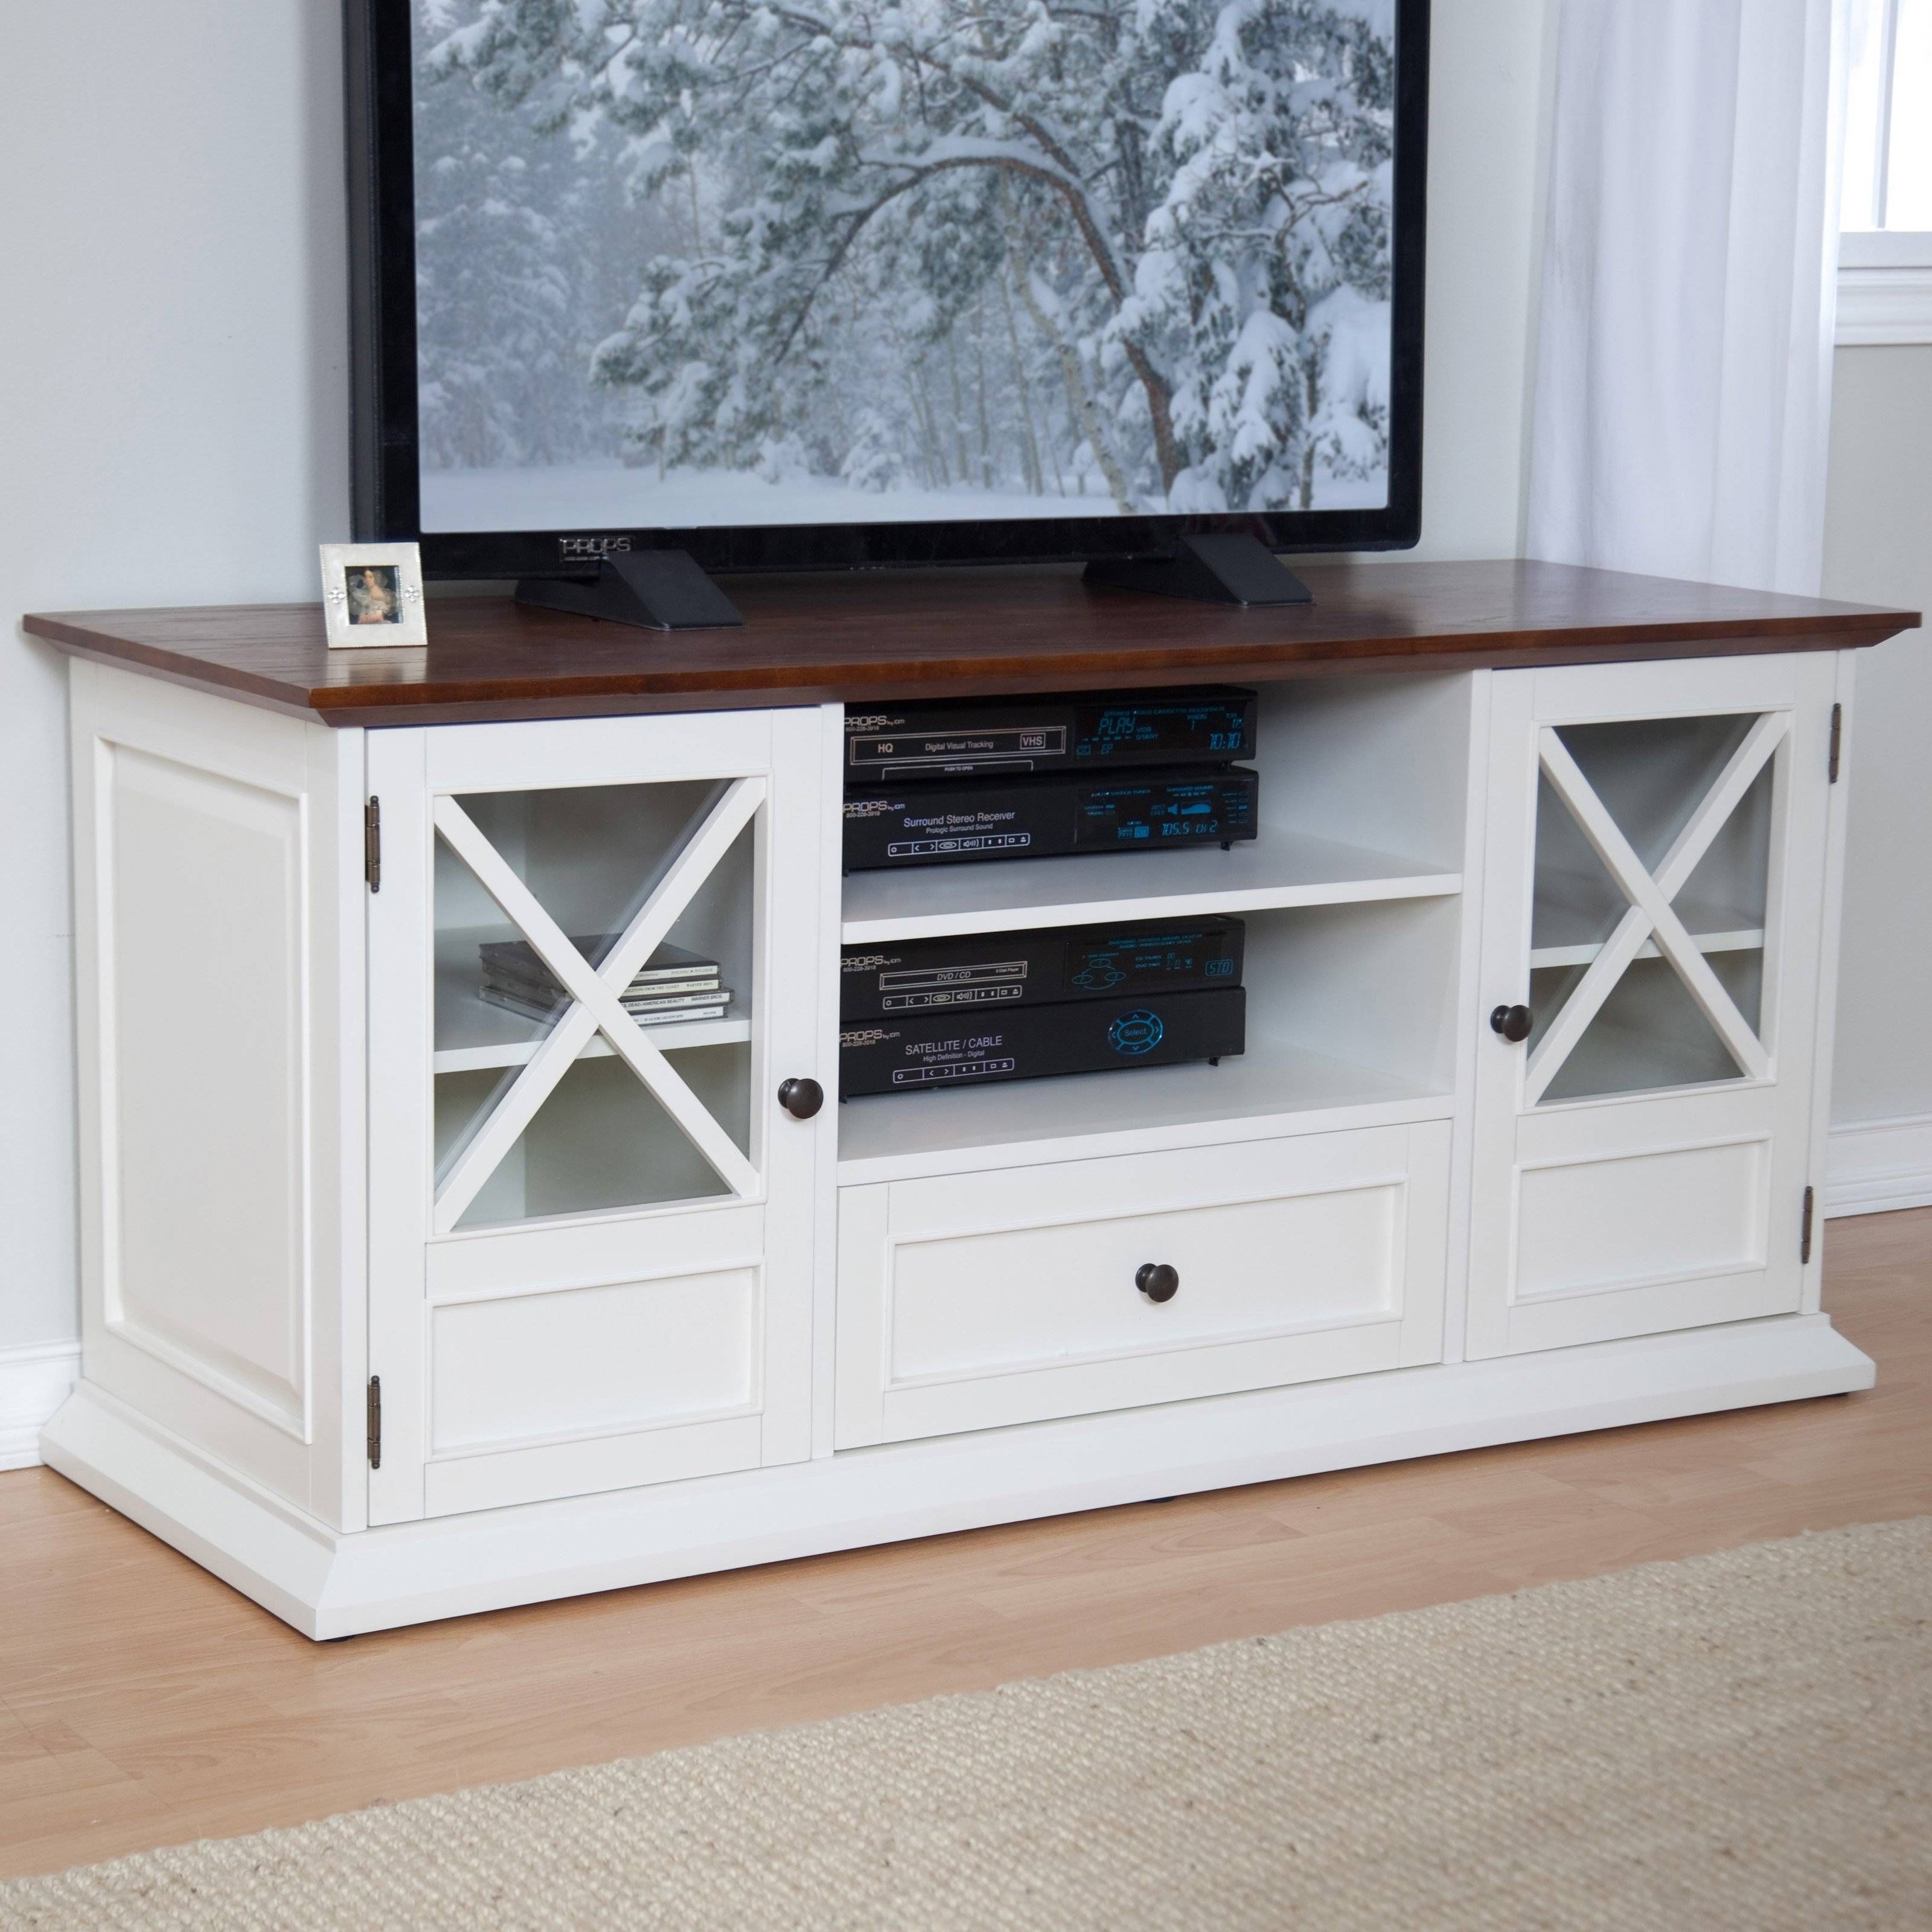 Corner Tv Stand For 60 Inch Flat Screen Tv Pertaining To Corner Tv Stands For 60 Inch Tv (View 5 of 15)